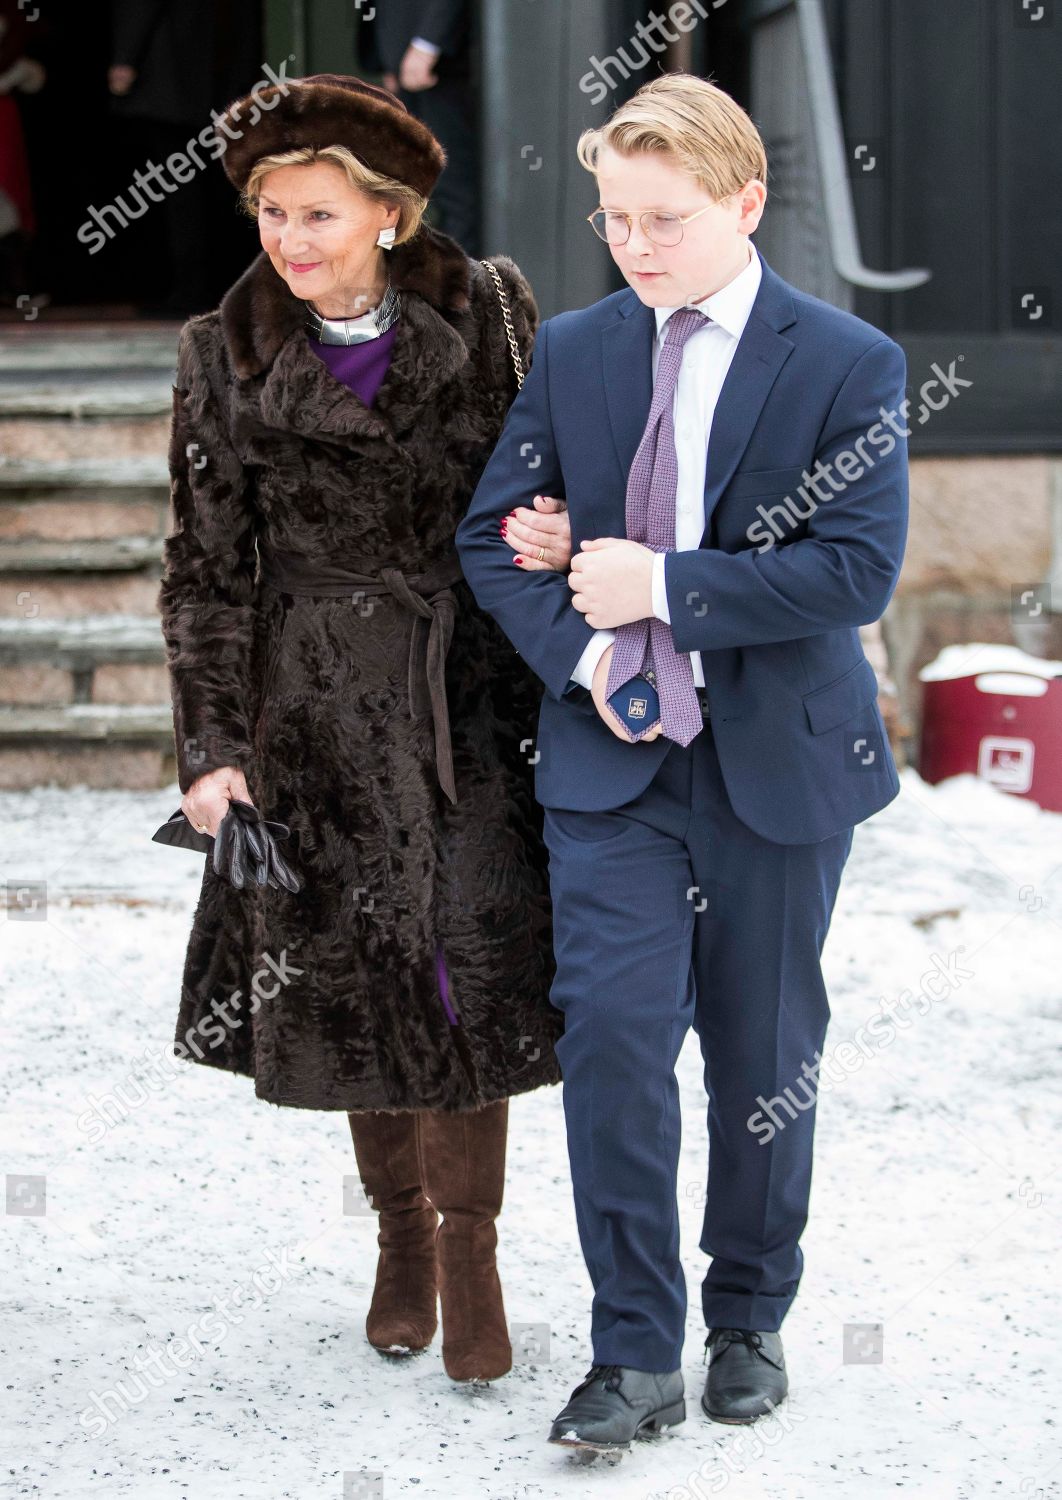 royal-family-attend-christmas-day-service-oslo-norway-shutterstock-editorial-10041248c.jpg